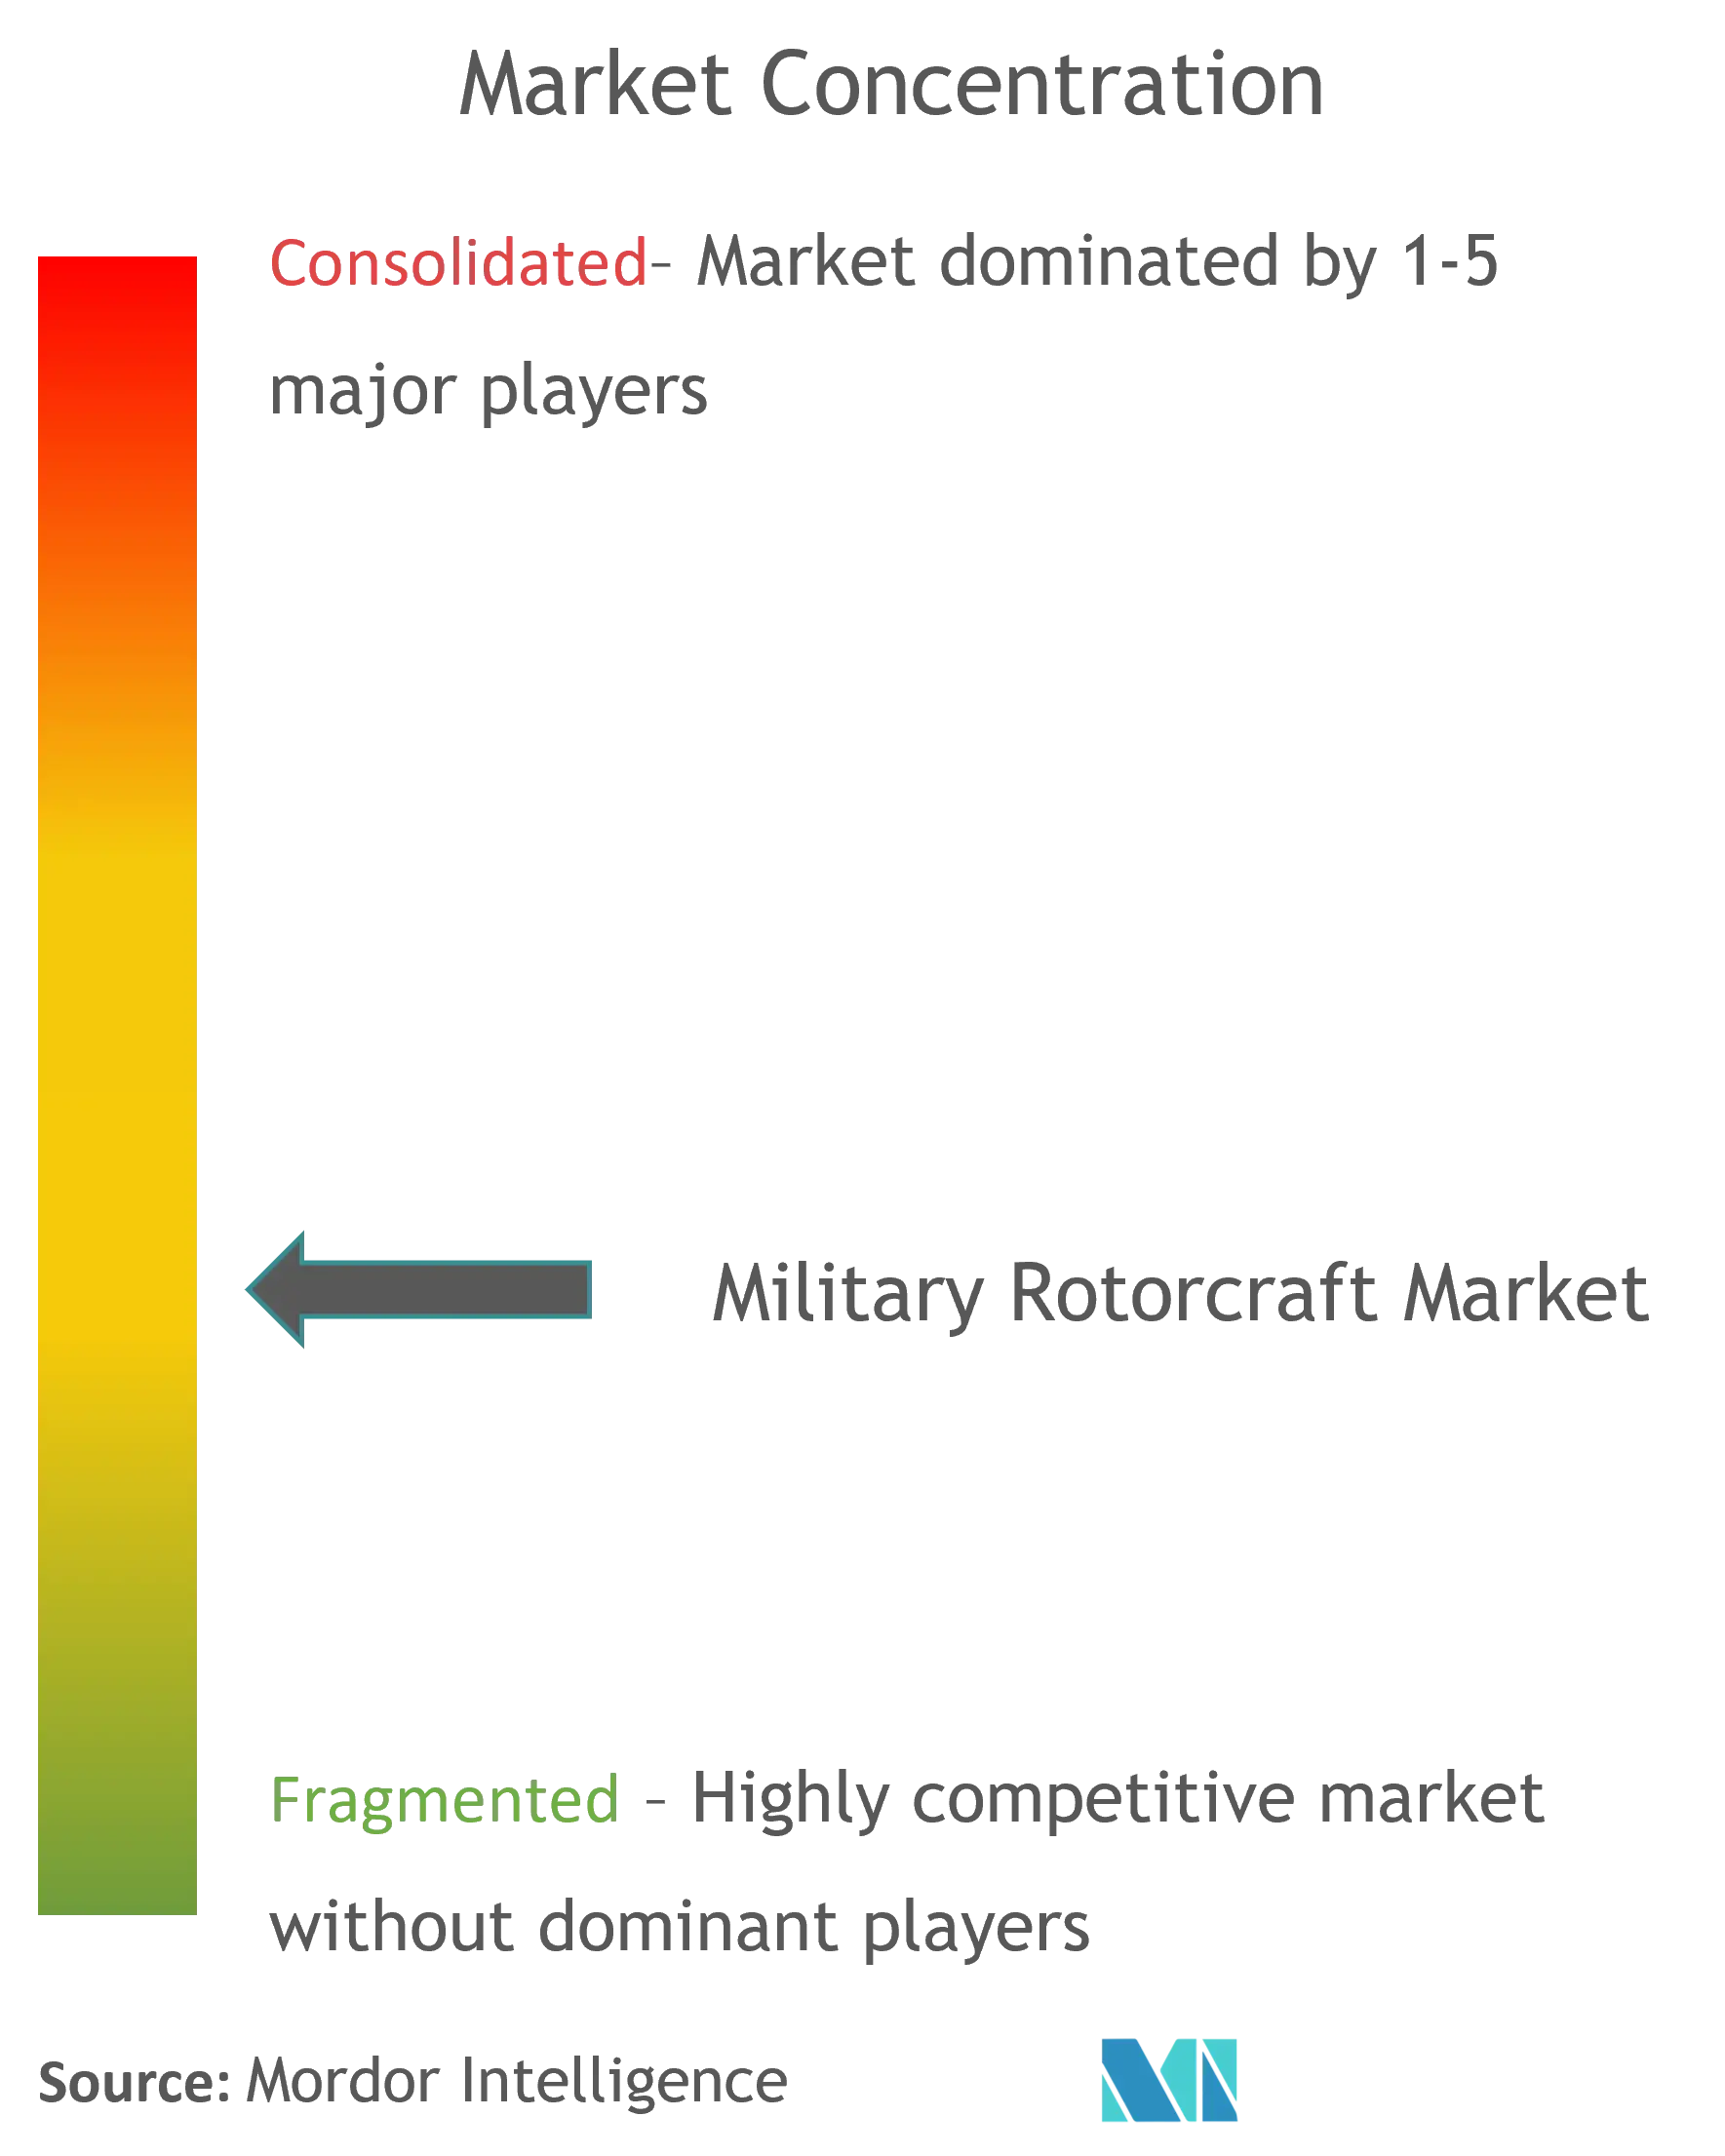 Global Military Rotorcraft Market Concentration